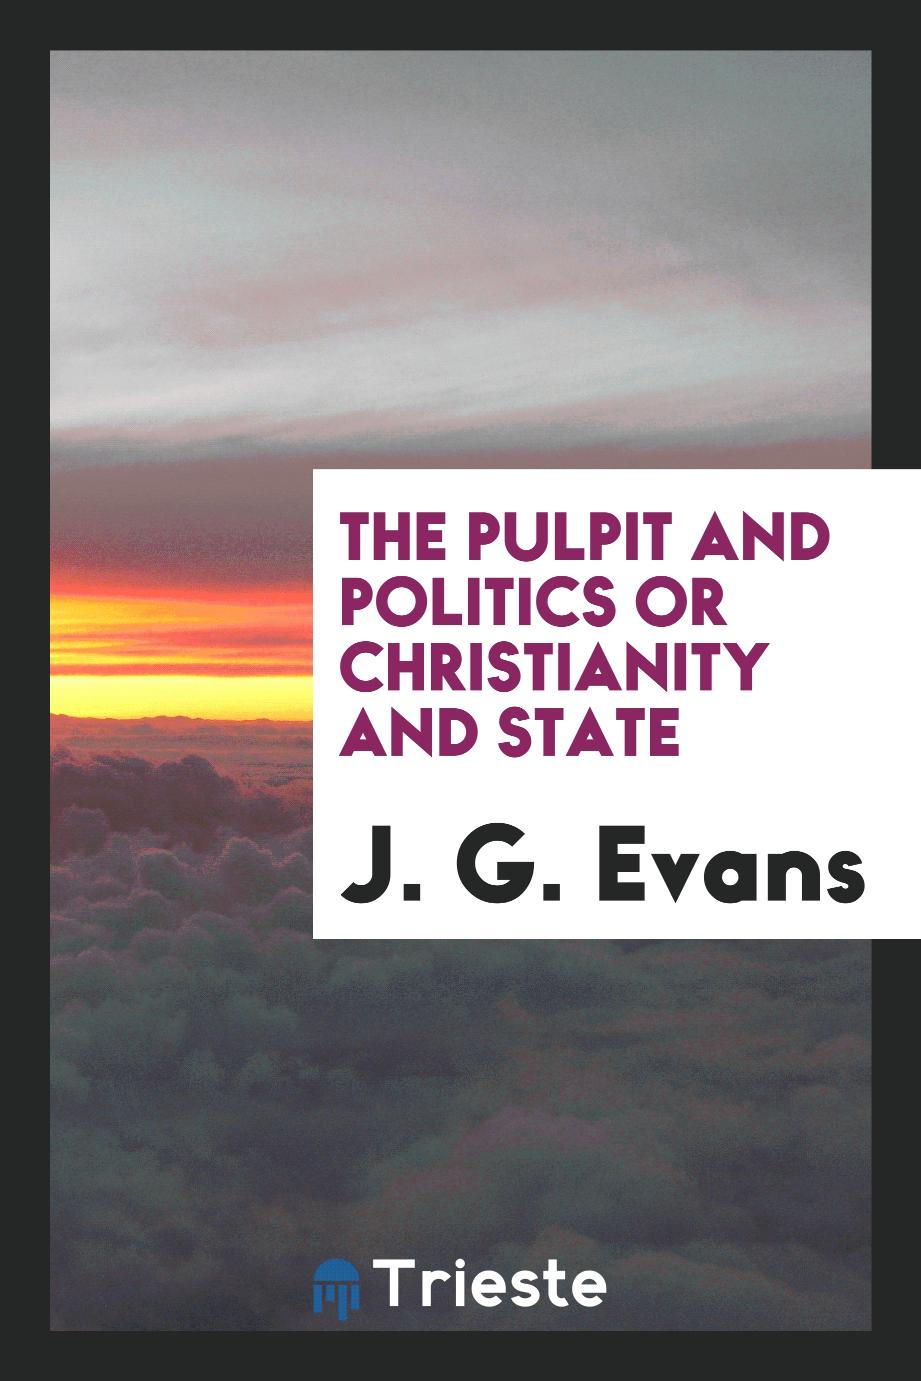 The Pulpit and Politics or Christianity and state